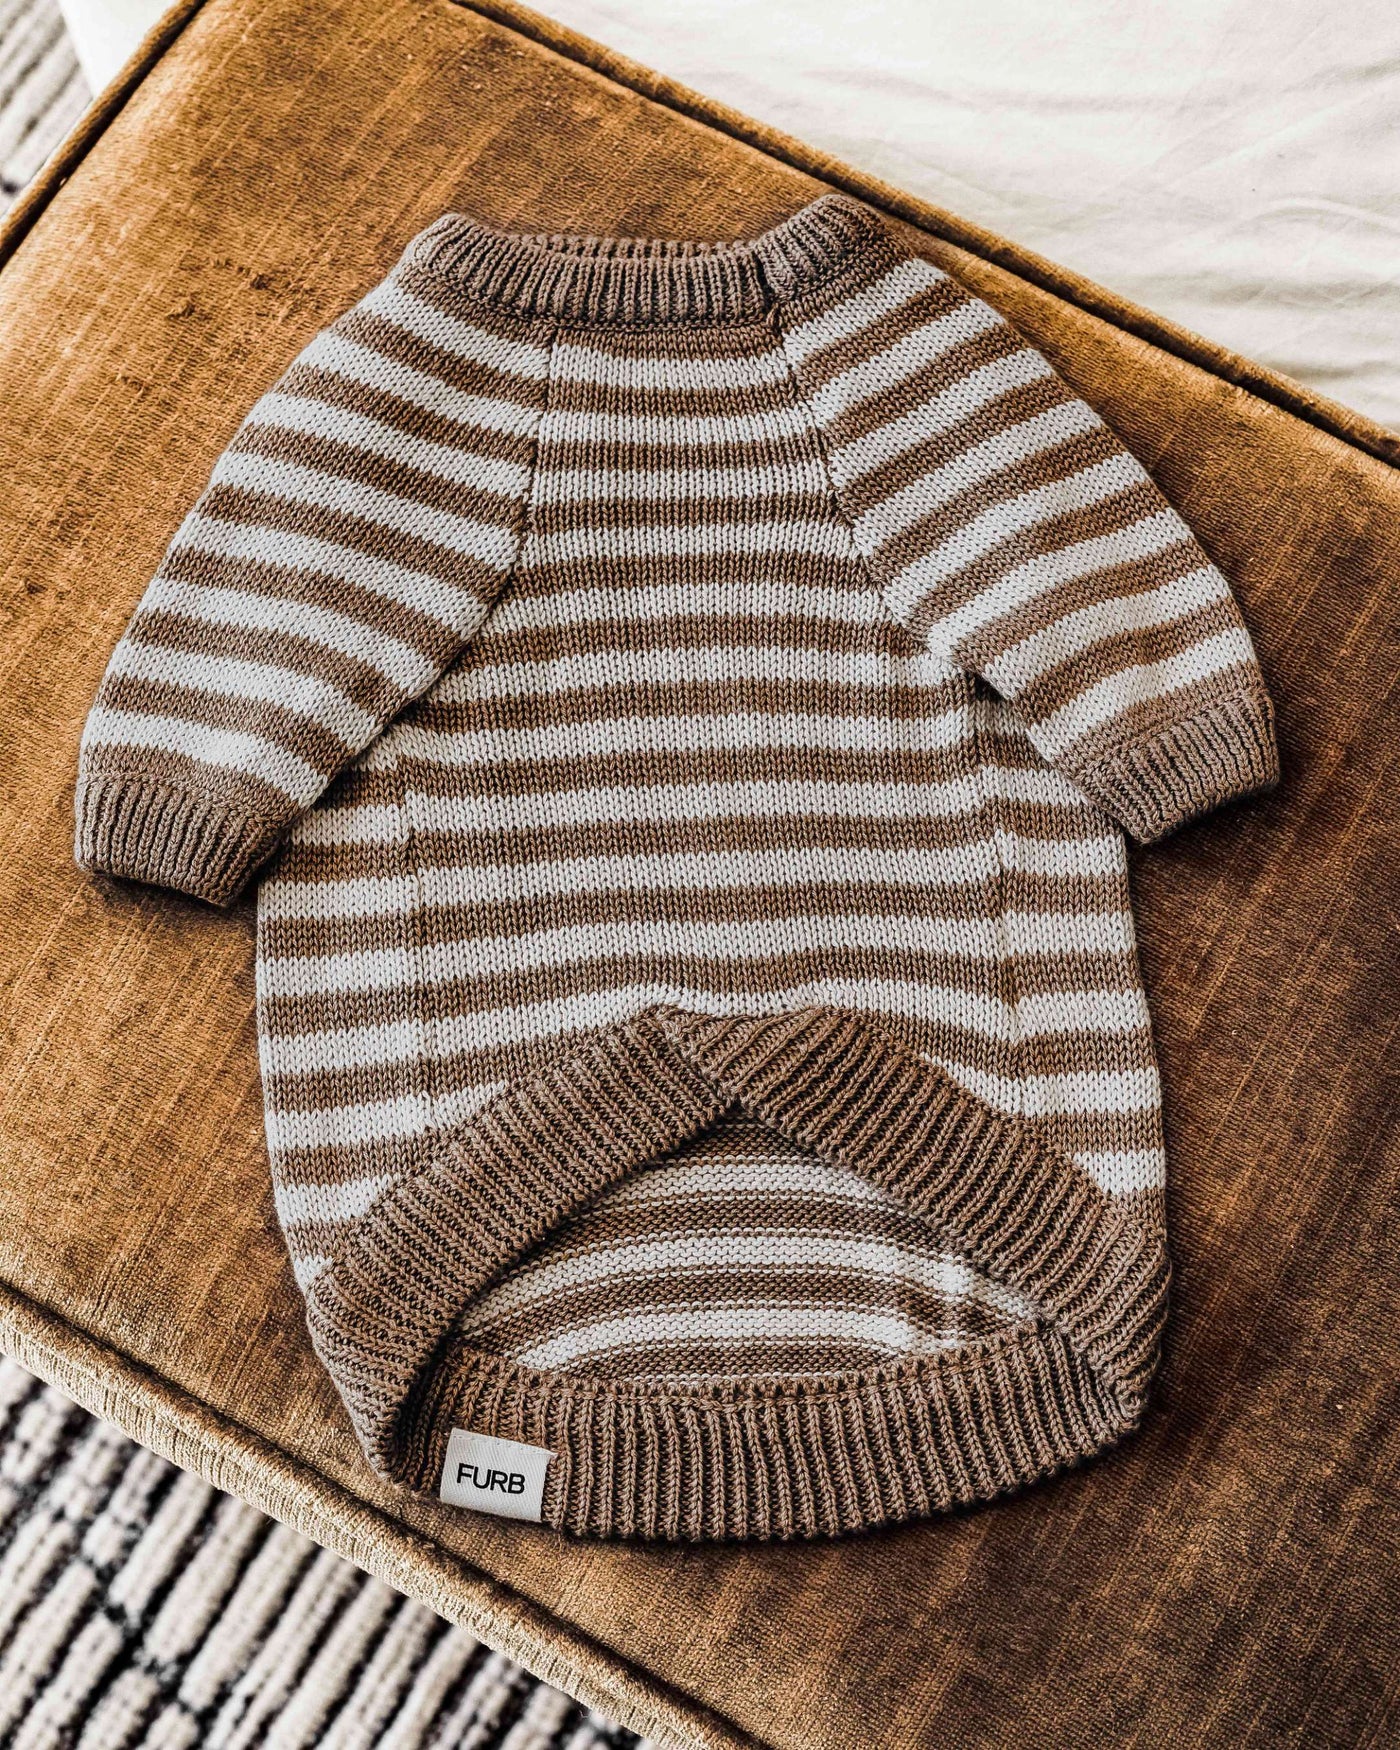 Like A Bandit Nutmeg Striped Sweater Product Image Detail